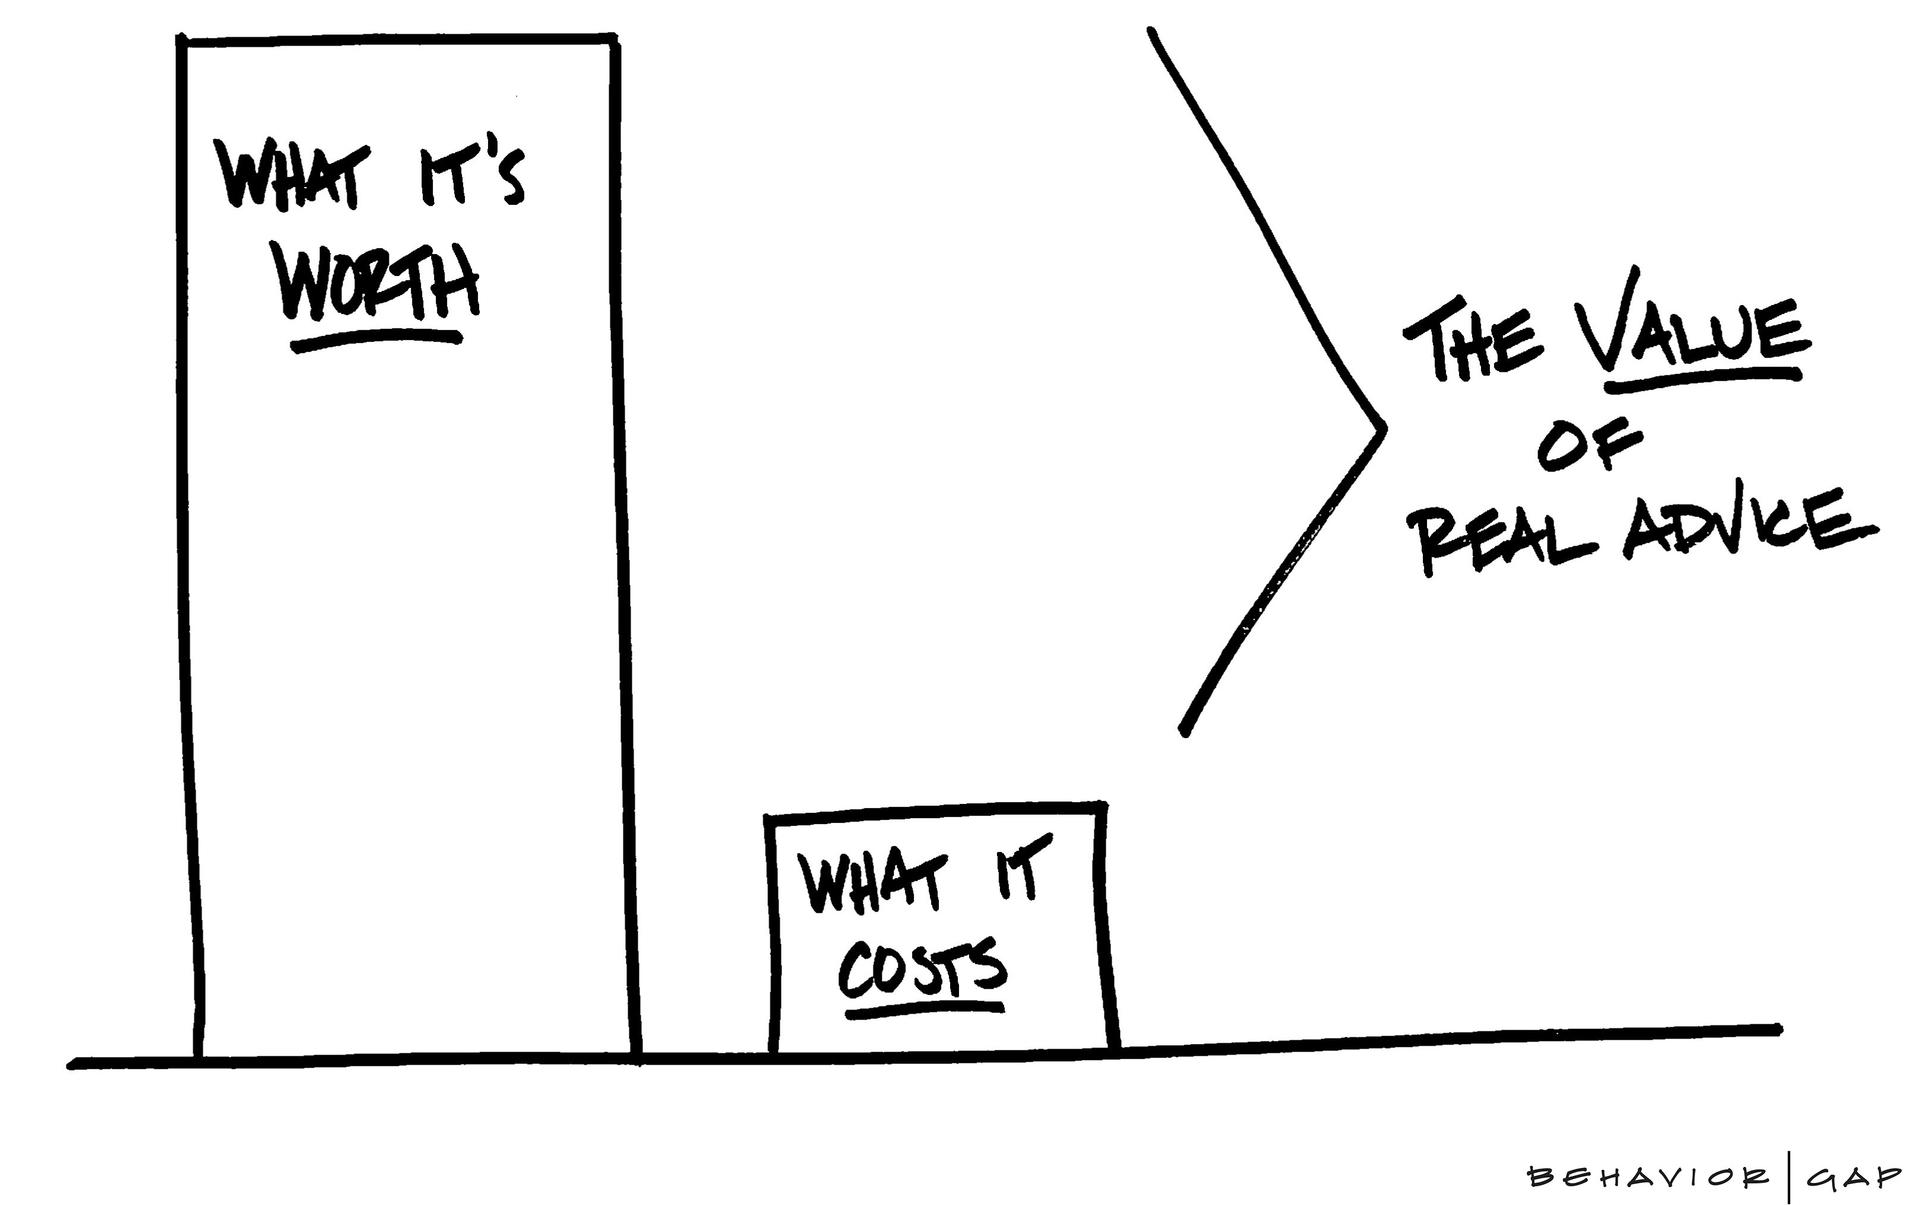 What it's worth vs. what it costs for the value of real advice